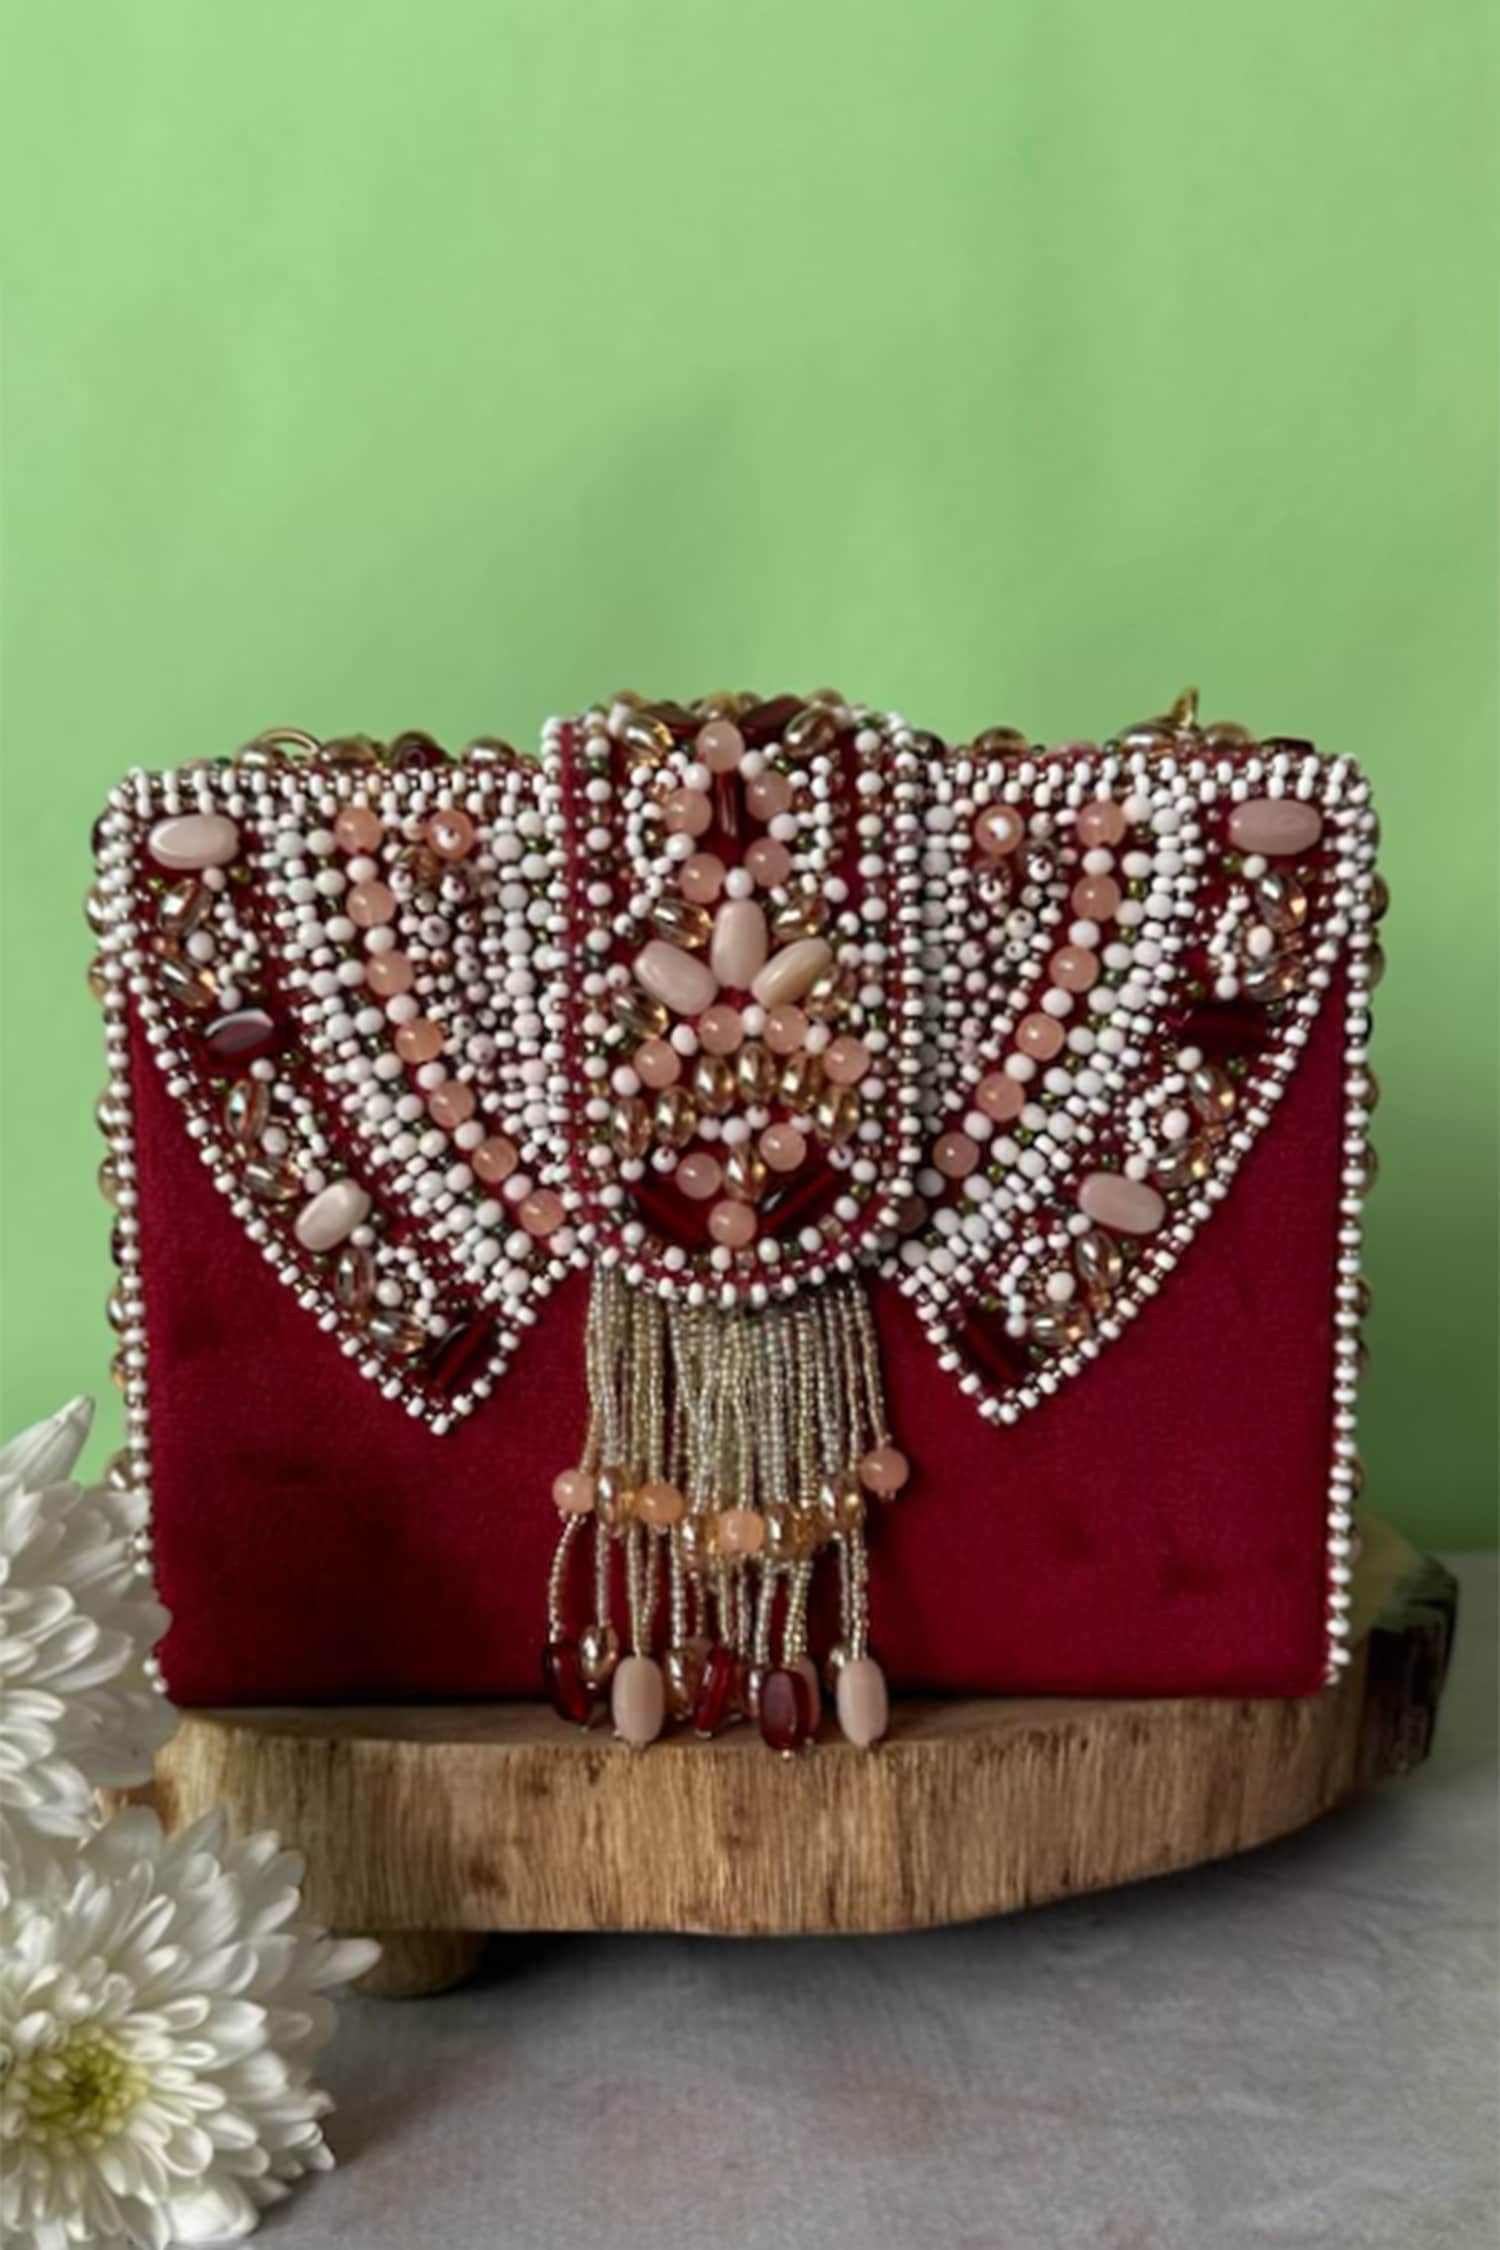 Accessorize With A Clutch Bag For Women To Complete Your Party Look